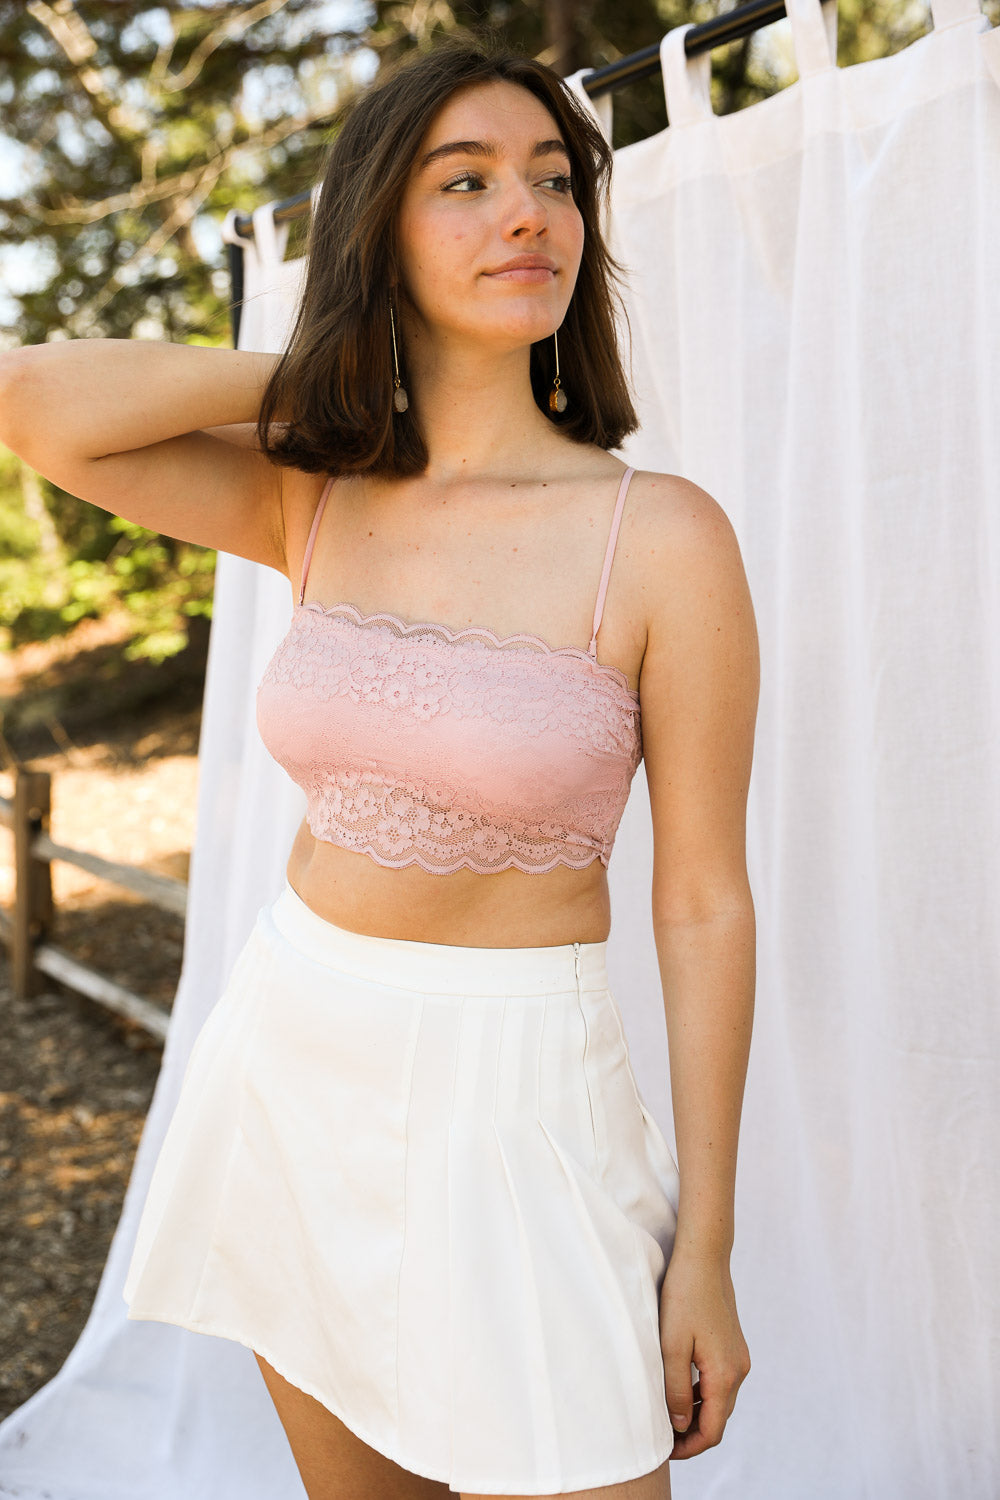 Leto Collection - Wide Lace Bandeau $25 – Thank you